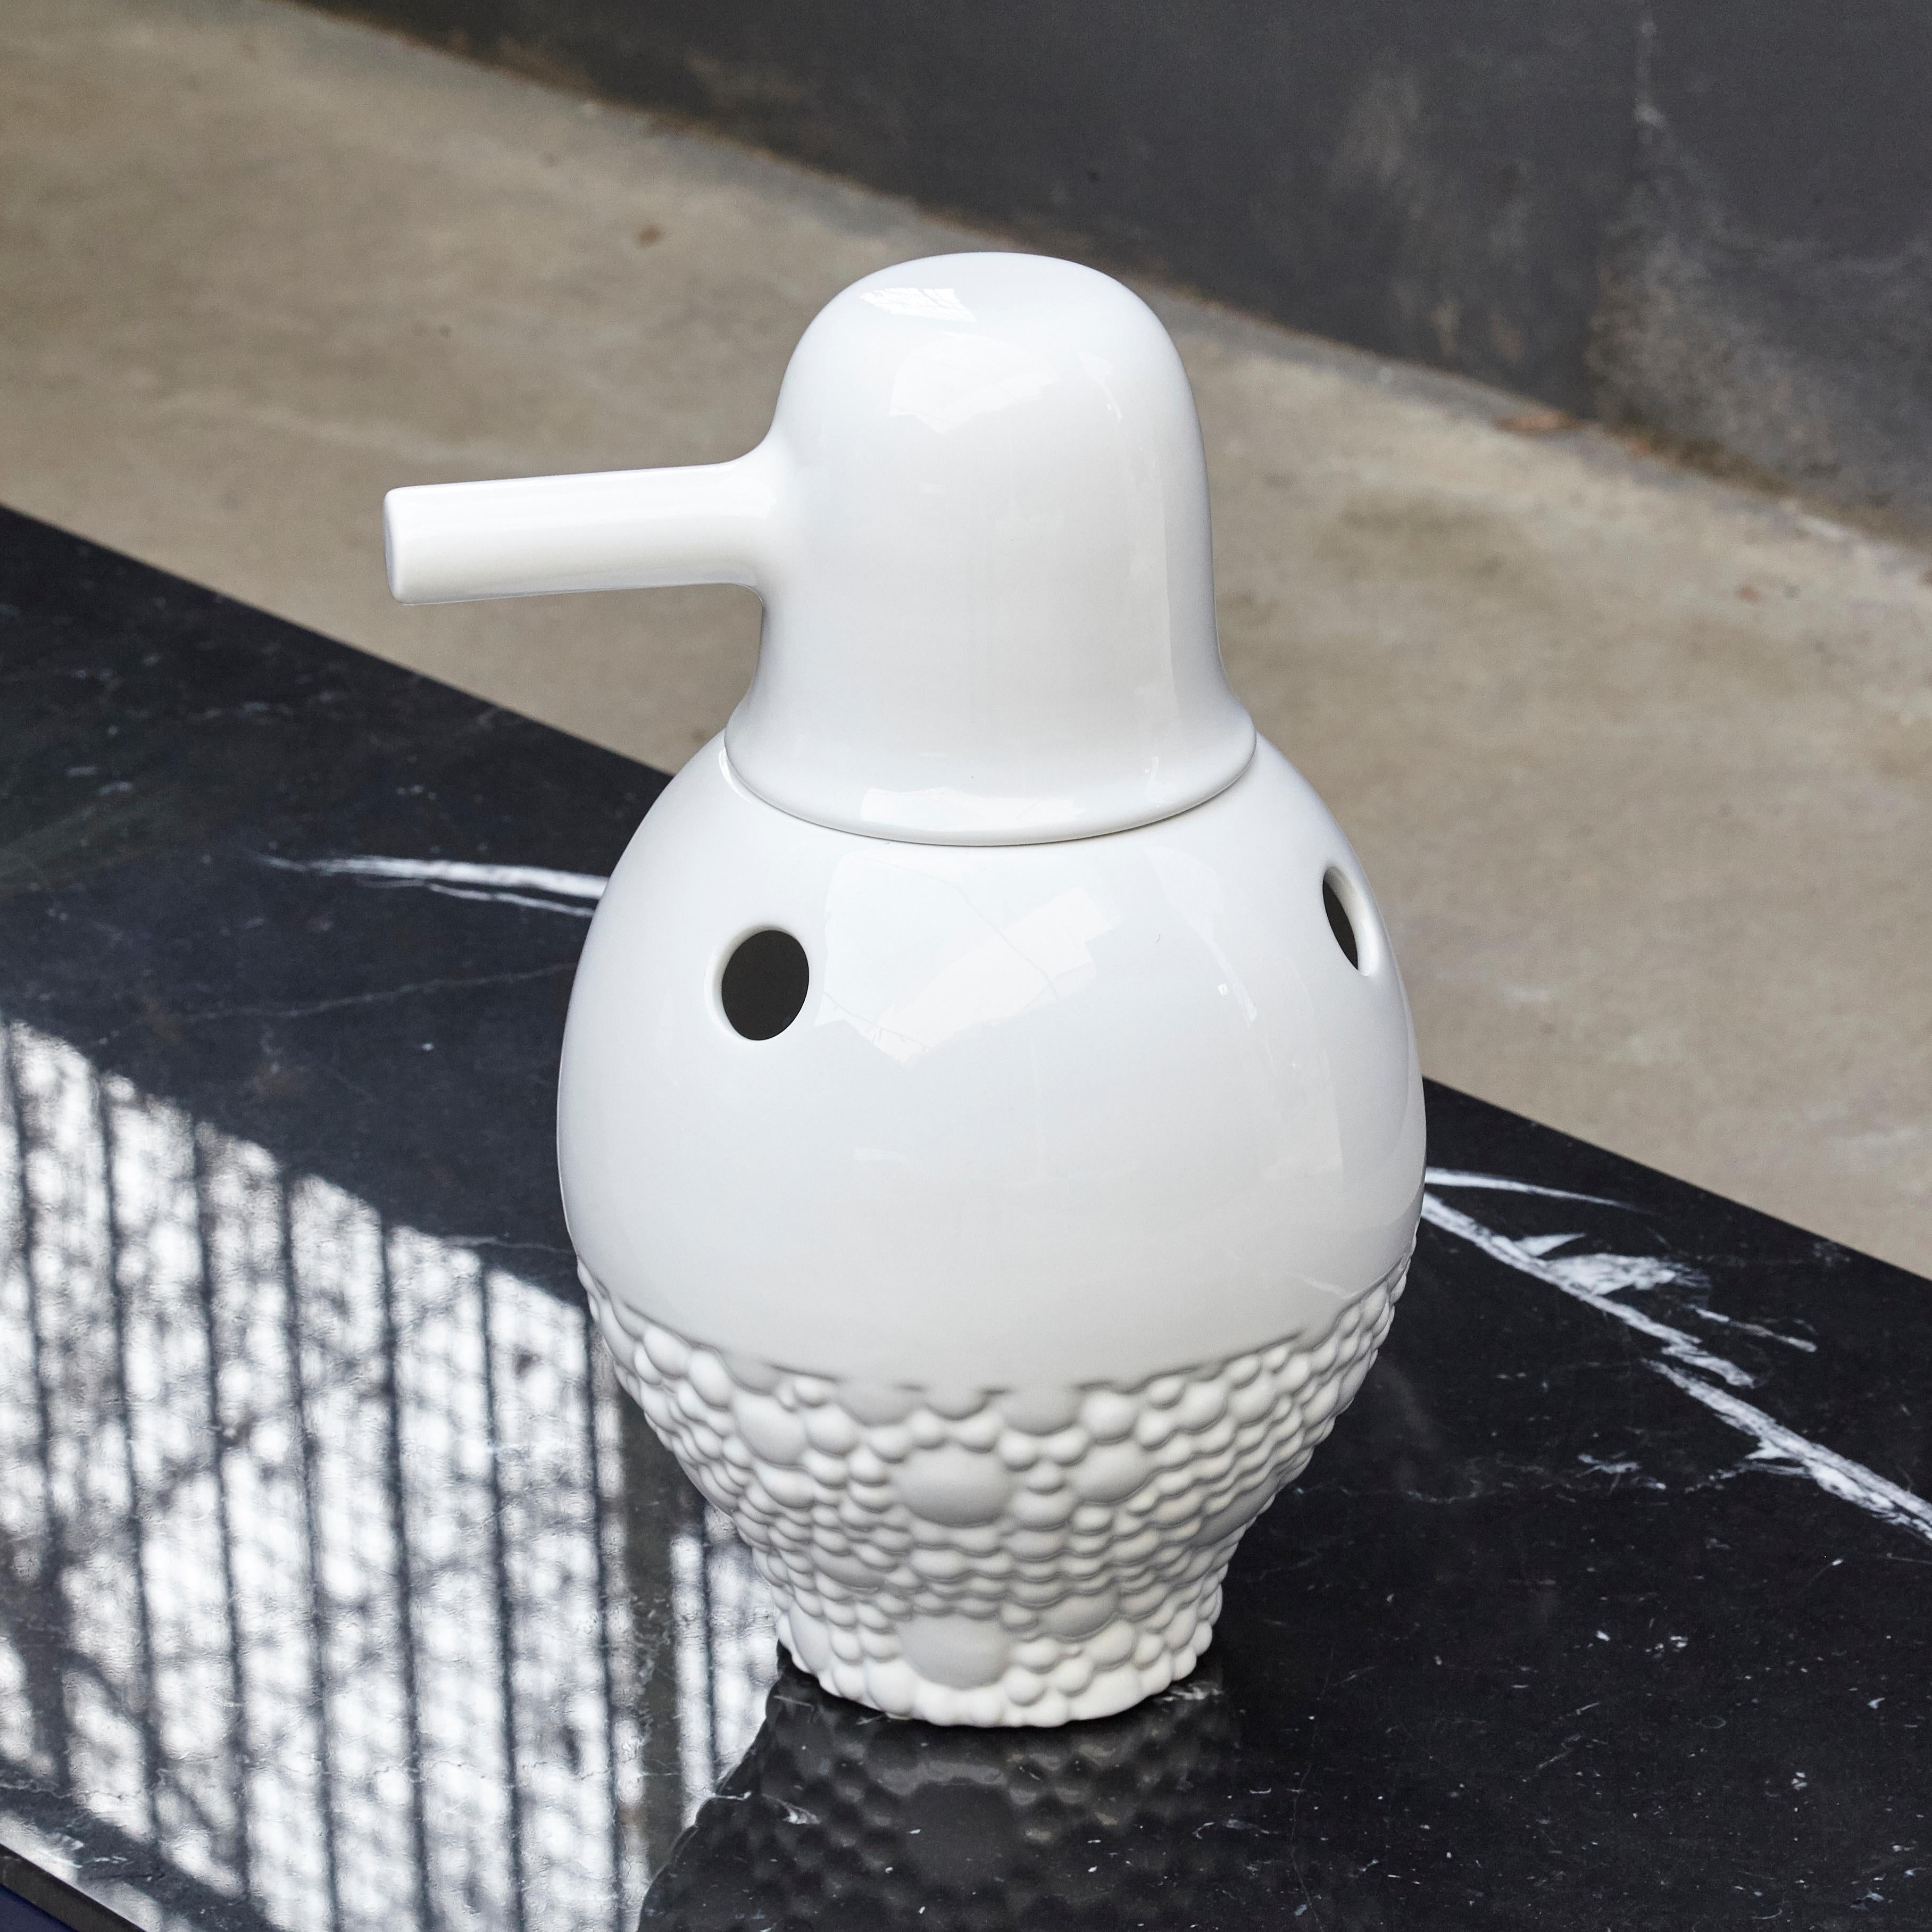 Contemporary showtime vase number 1 by Jaime Hayon.
Manufactured by BD Barcelona (Spain).

Made up of two pieces in glazed stoneware, with a white finish

Measures: Height 33 cm x diameter 19 cm.